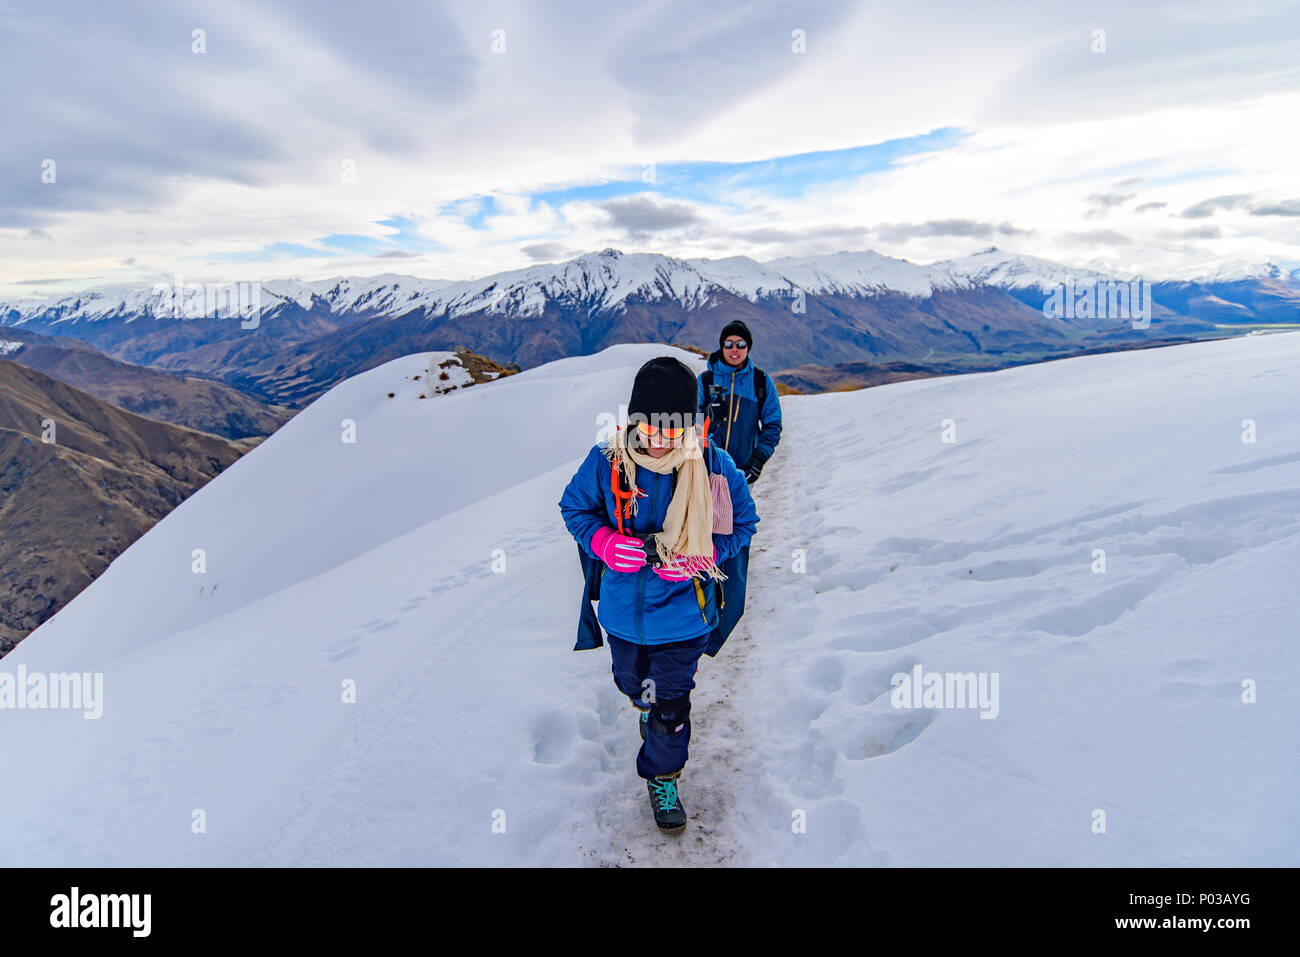 Hiking in the snow mountains, Roy's Peak, New Zealand Stock Photo